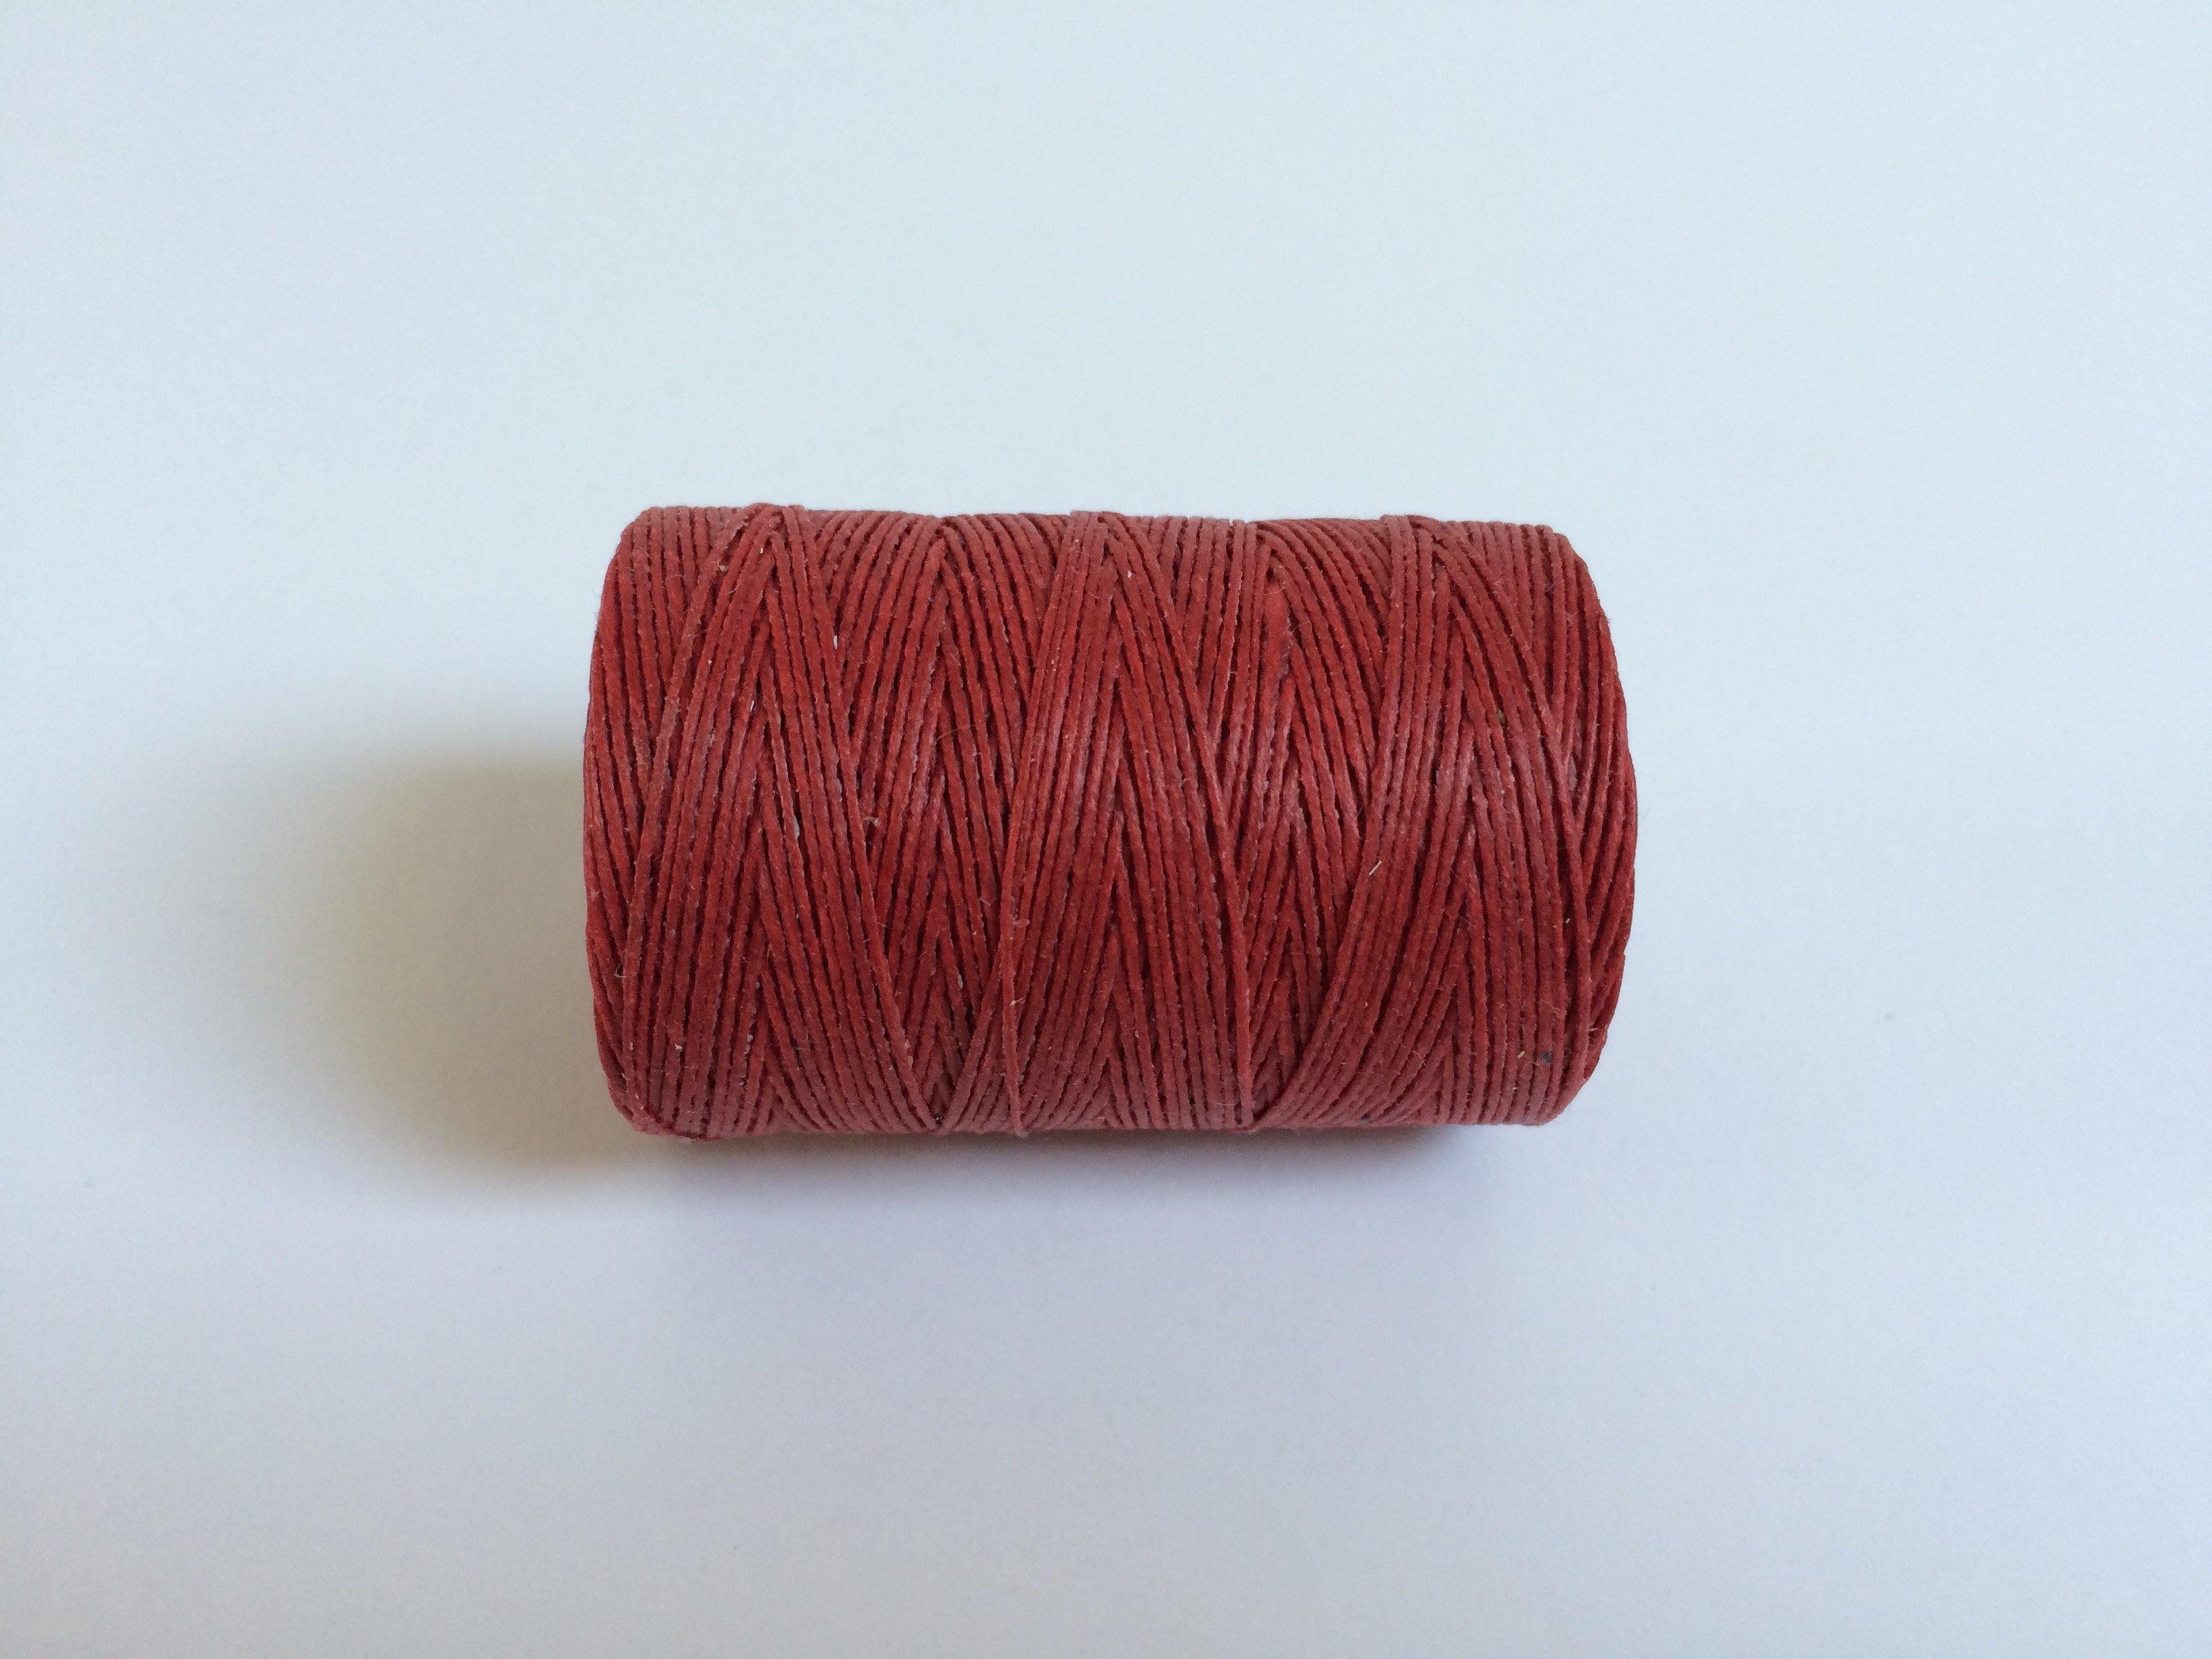  Irish Waxed Linen, Farbe 14 country red - bead&more